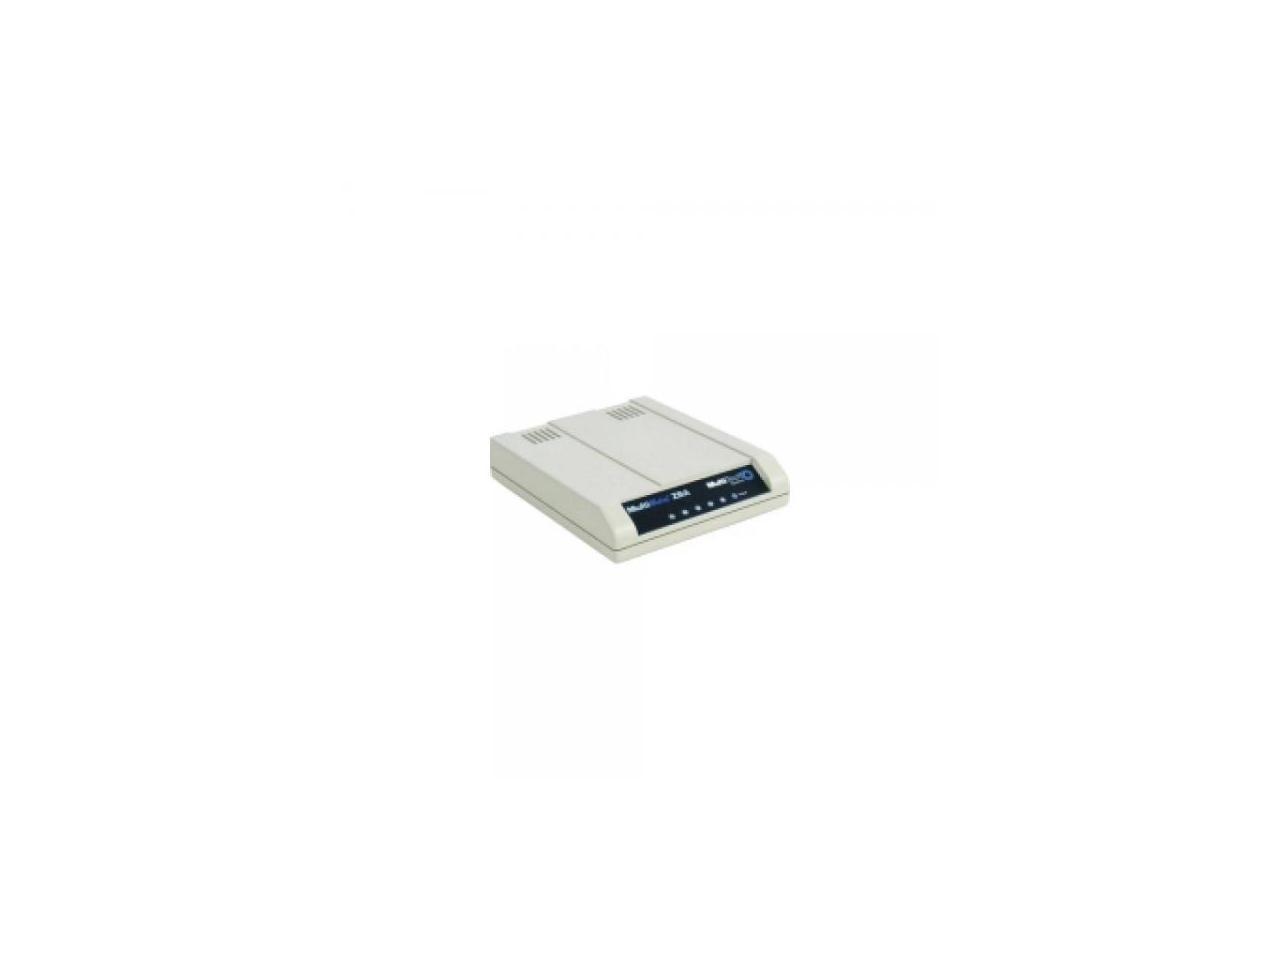 usb cdc modem device driver free download for windows 7